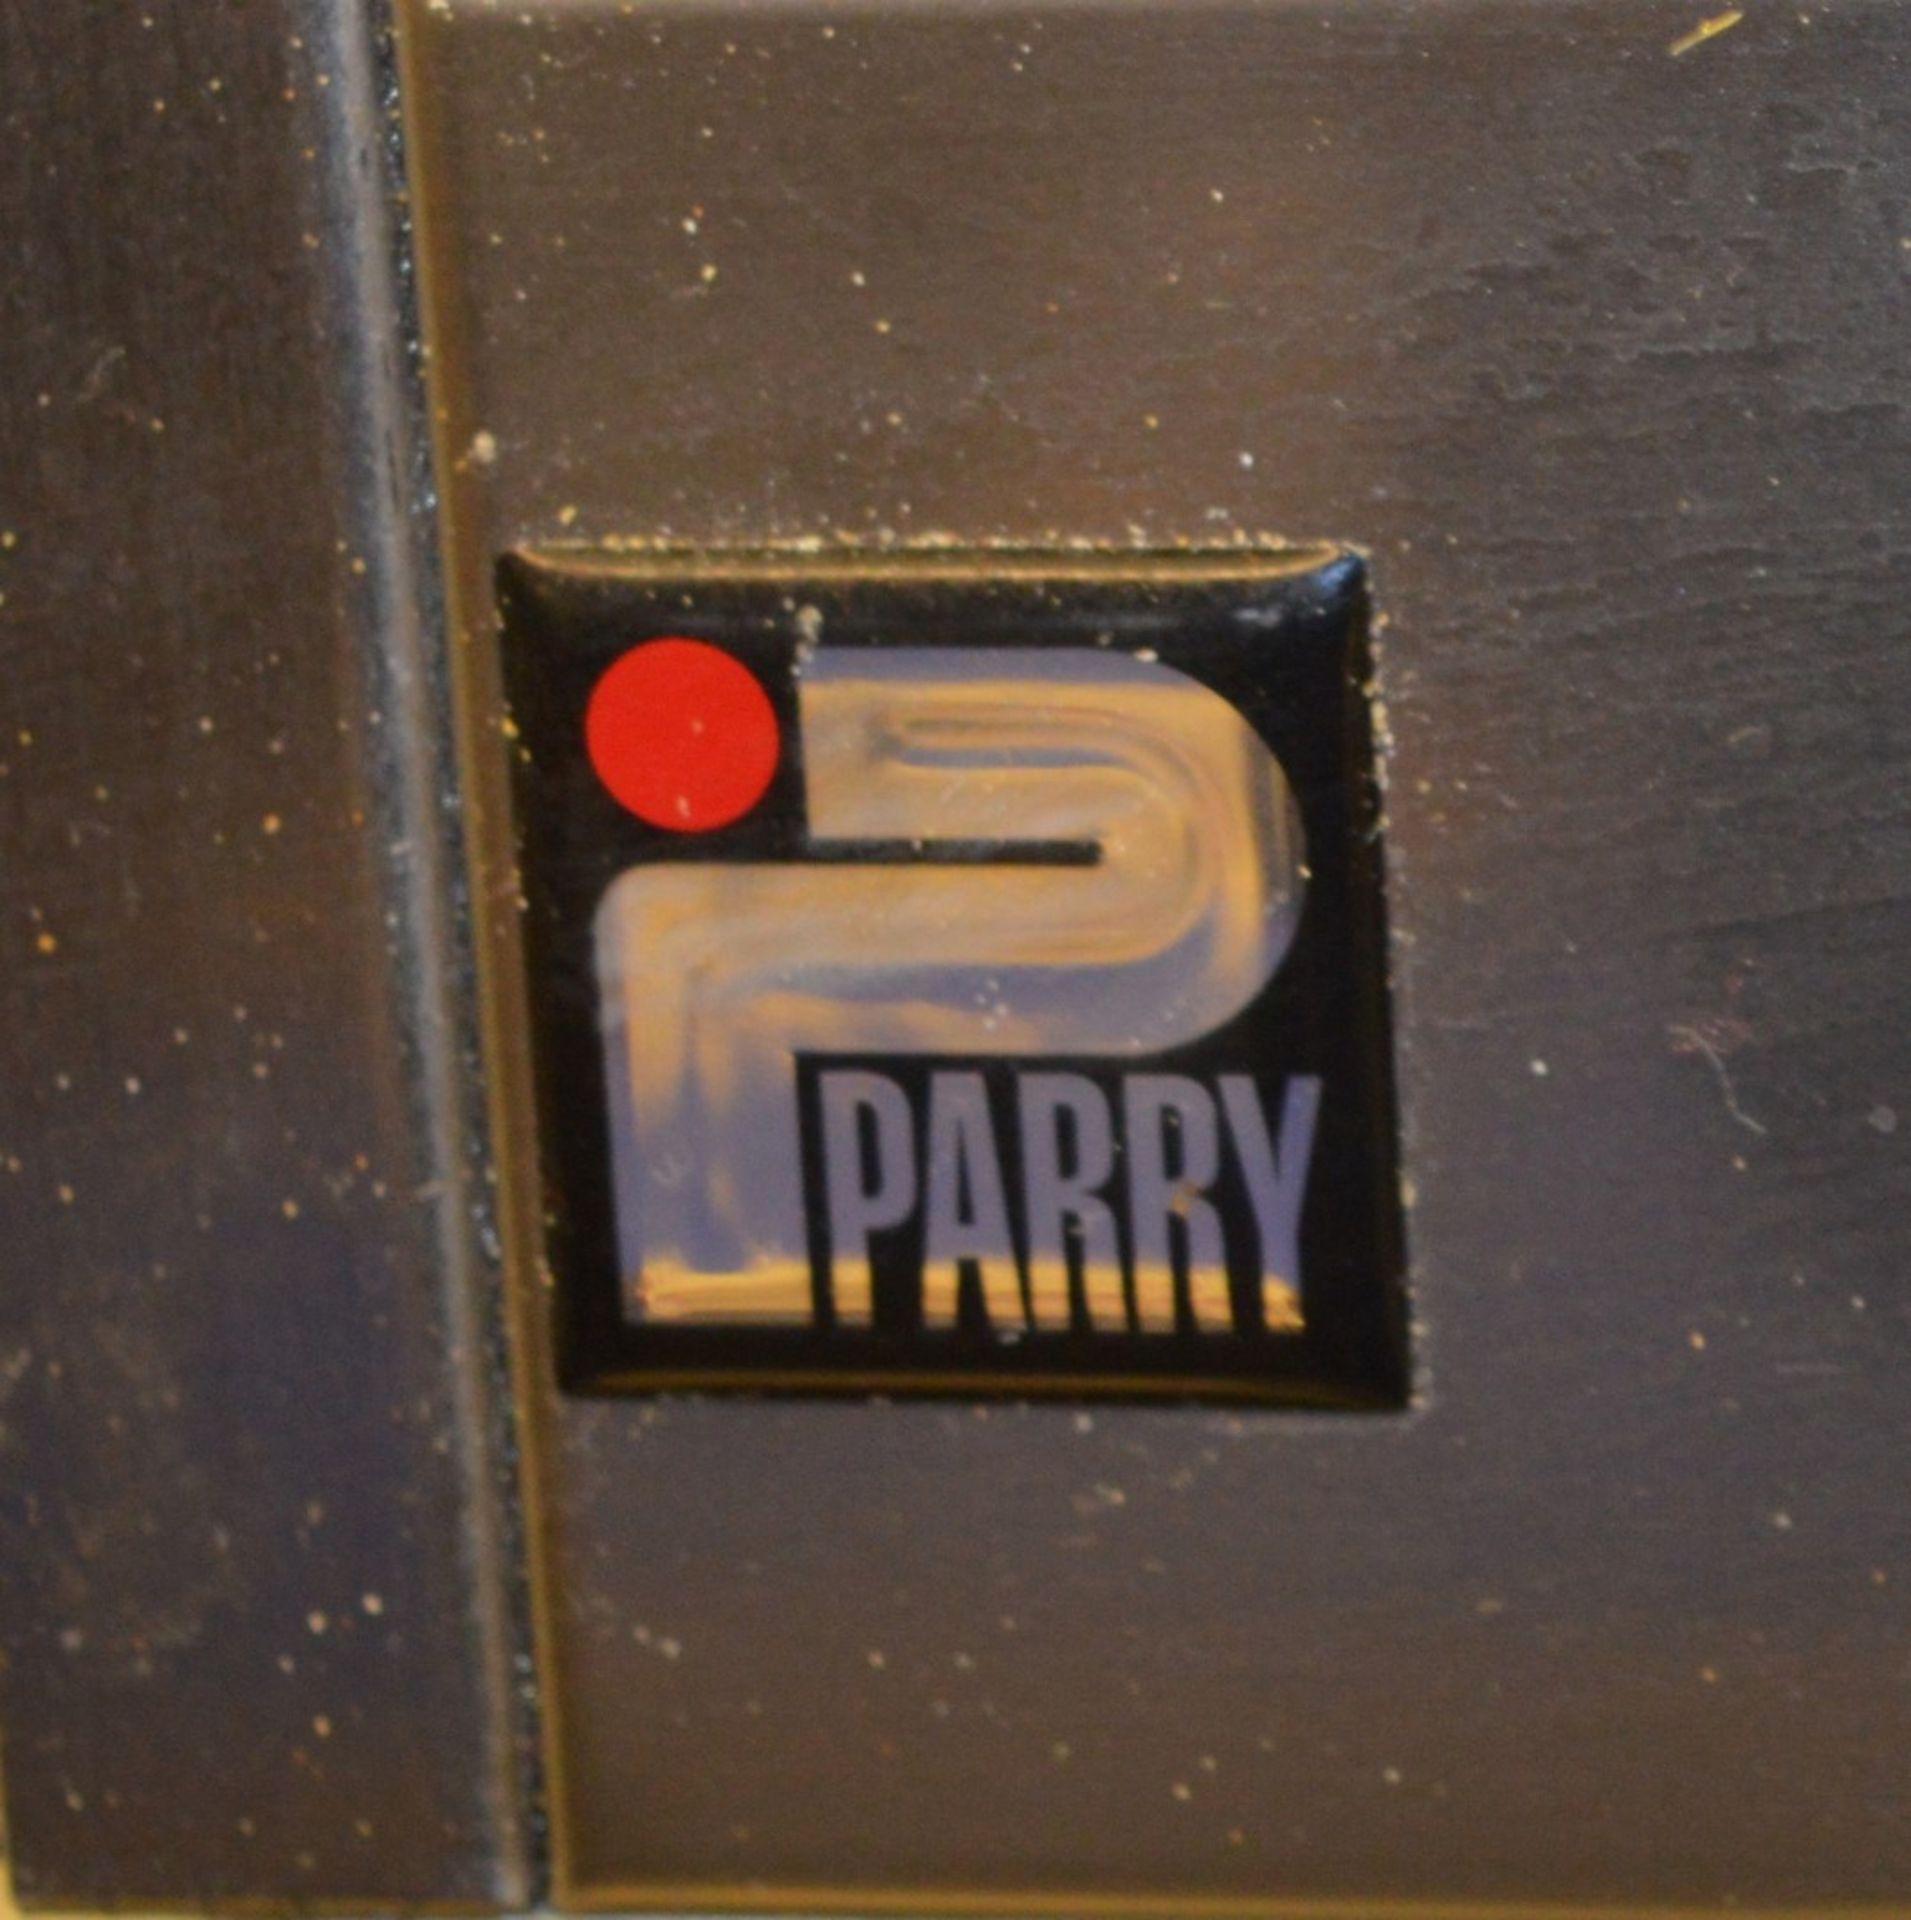 1 x Parry CPG Stainless Steel Counter Top Pizza Grill - 240v Plug - Featurees Infra Red Elements, - Image 2 of 3